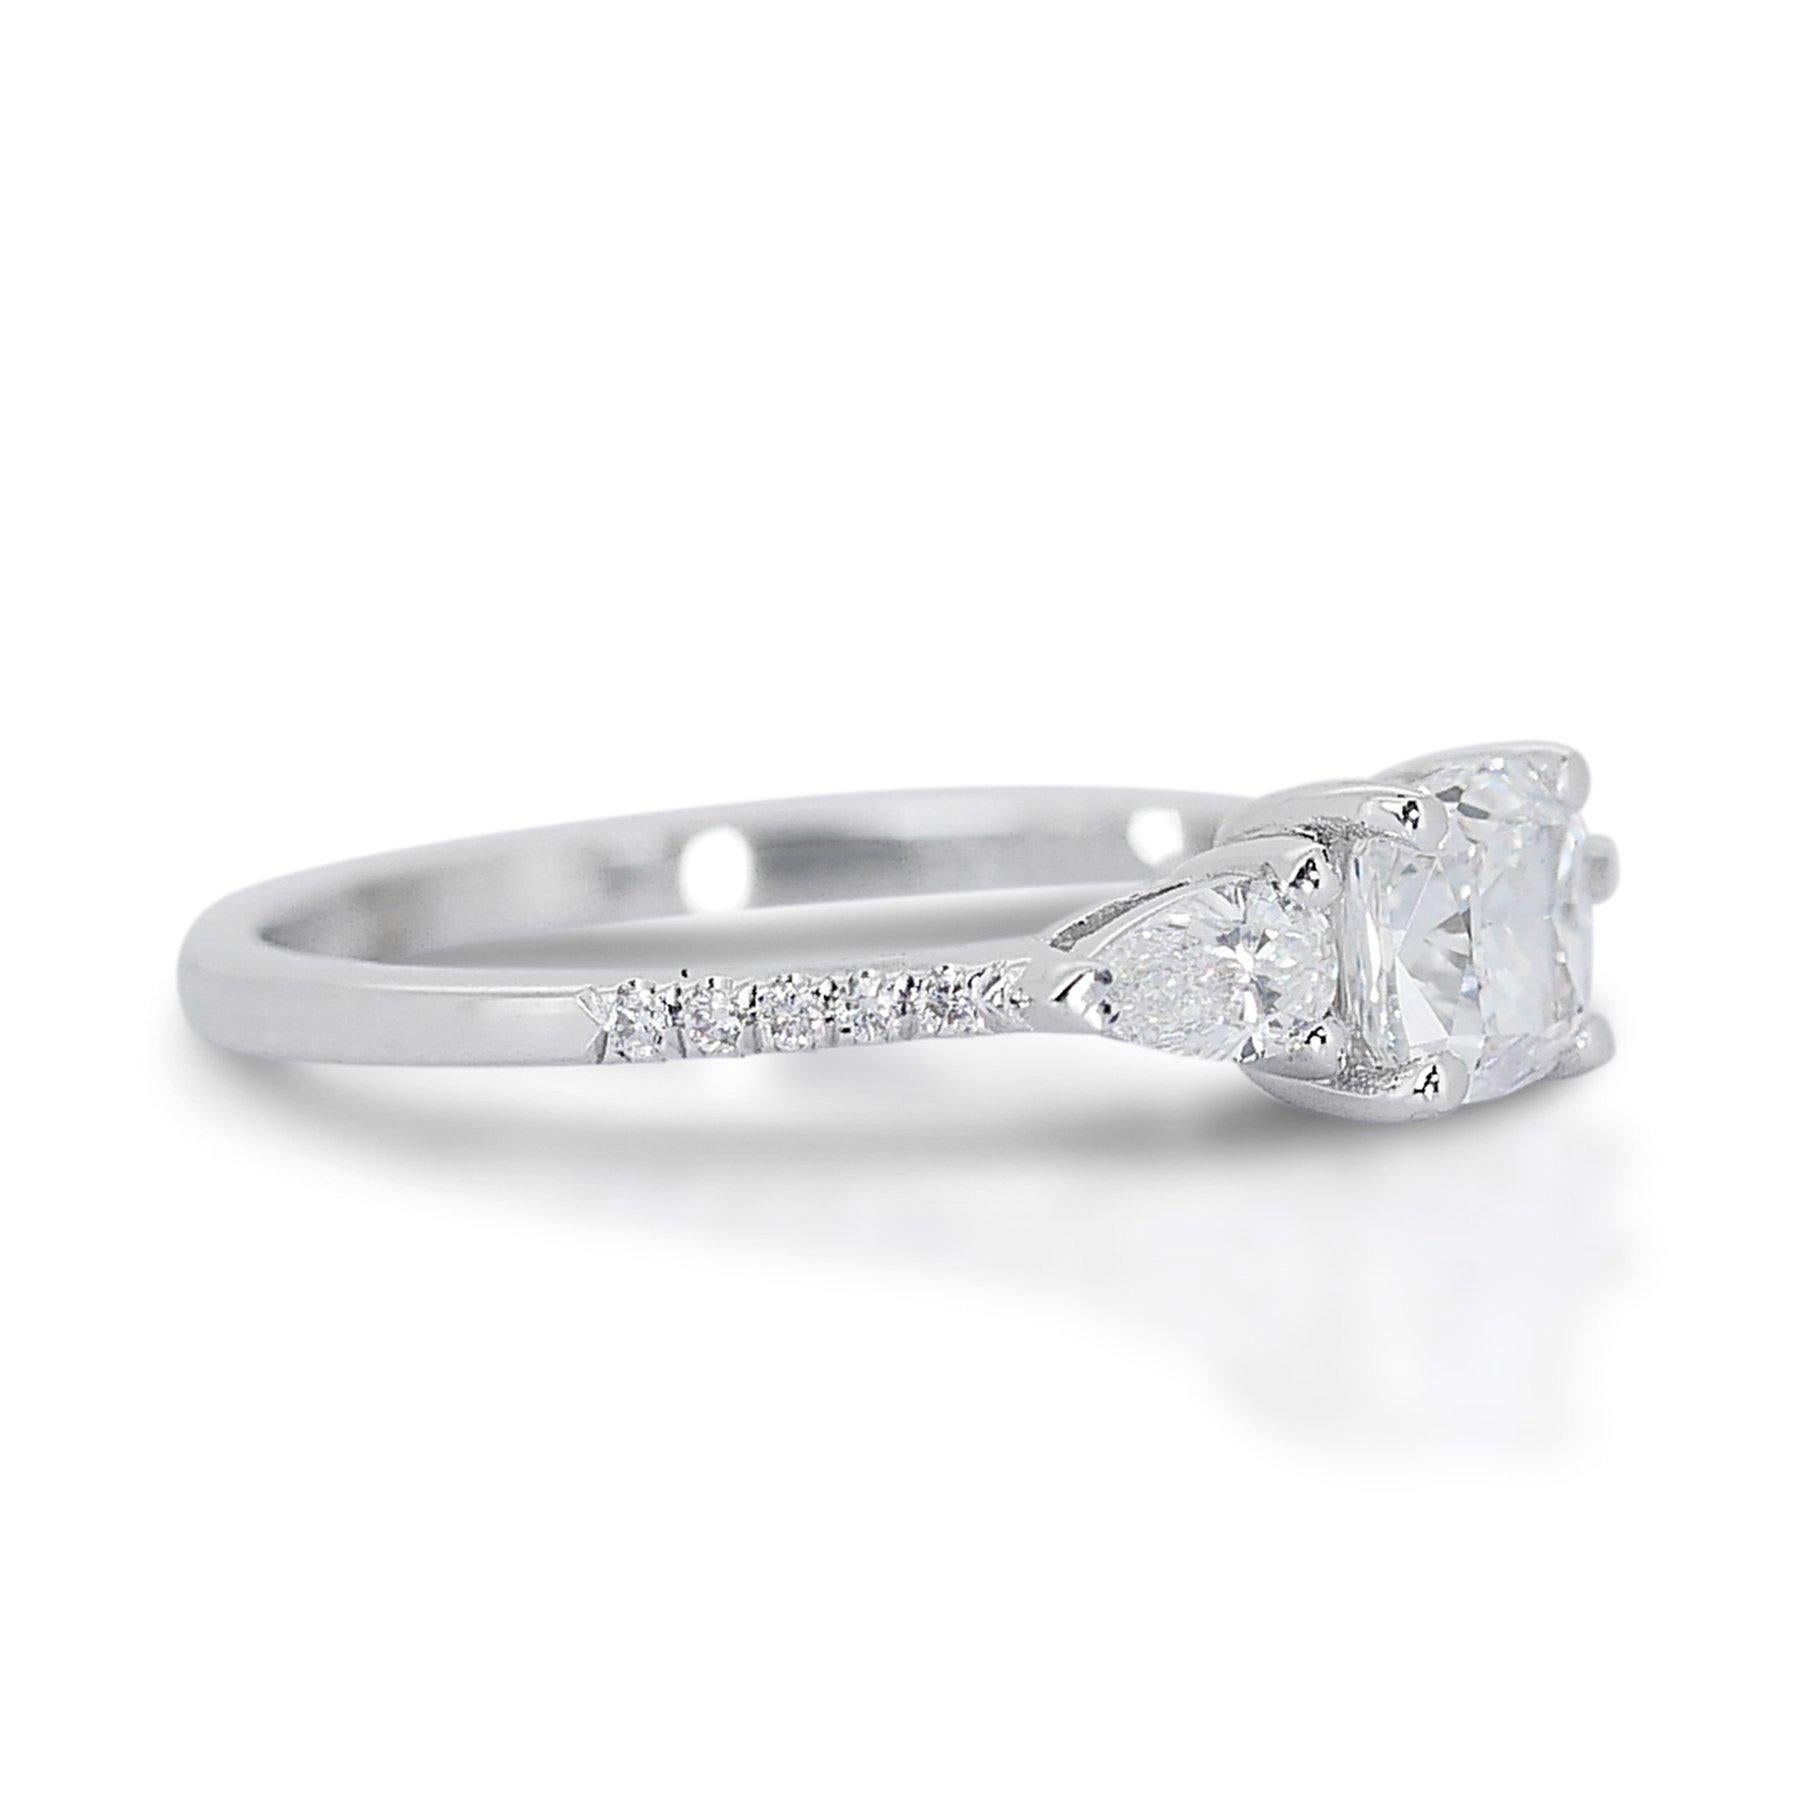 Captivating 0.78ct Diamond 3-Stone Ring in 18k White Gold - GIA Certified

Discover refined elegance with this 18k white gold diamond 3-stone ring, featuring a stunning 0.73-carat cushion-cut diamond as the centerpiece. Accompanying the main stone